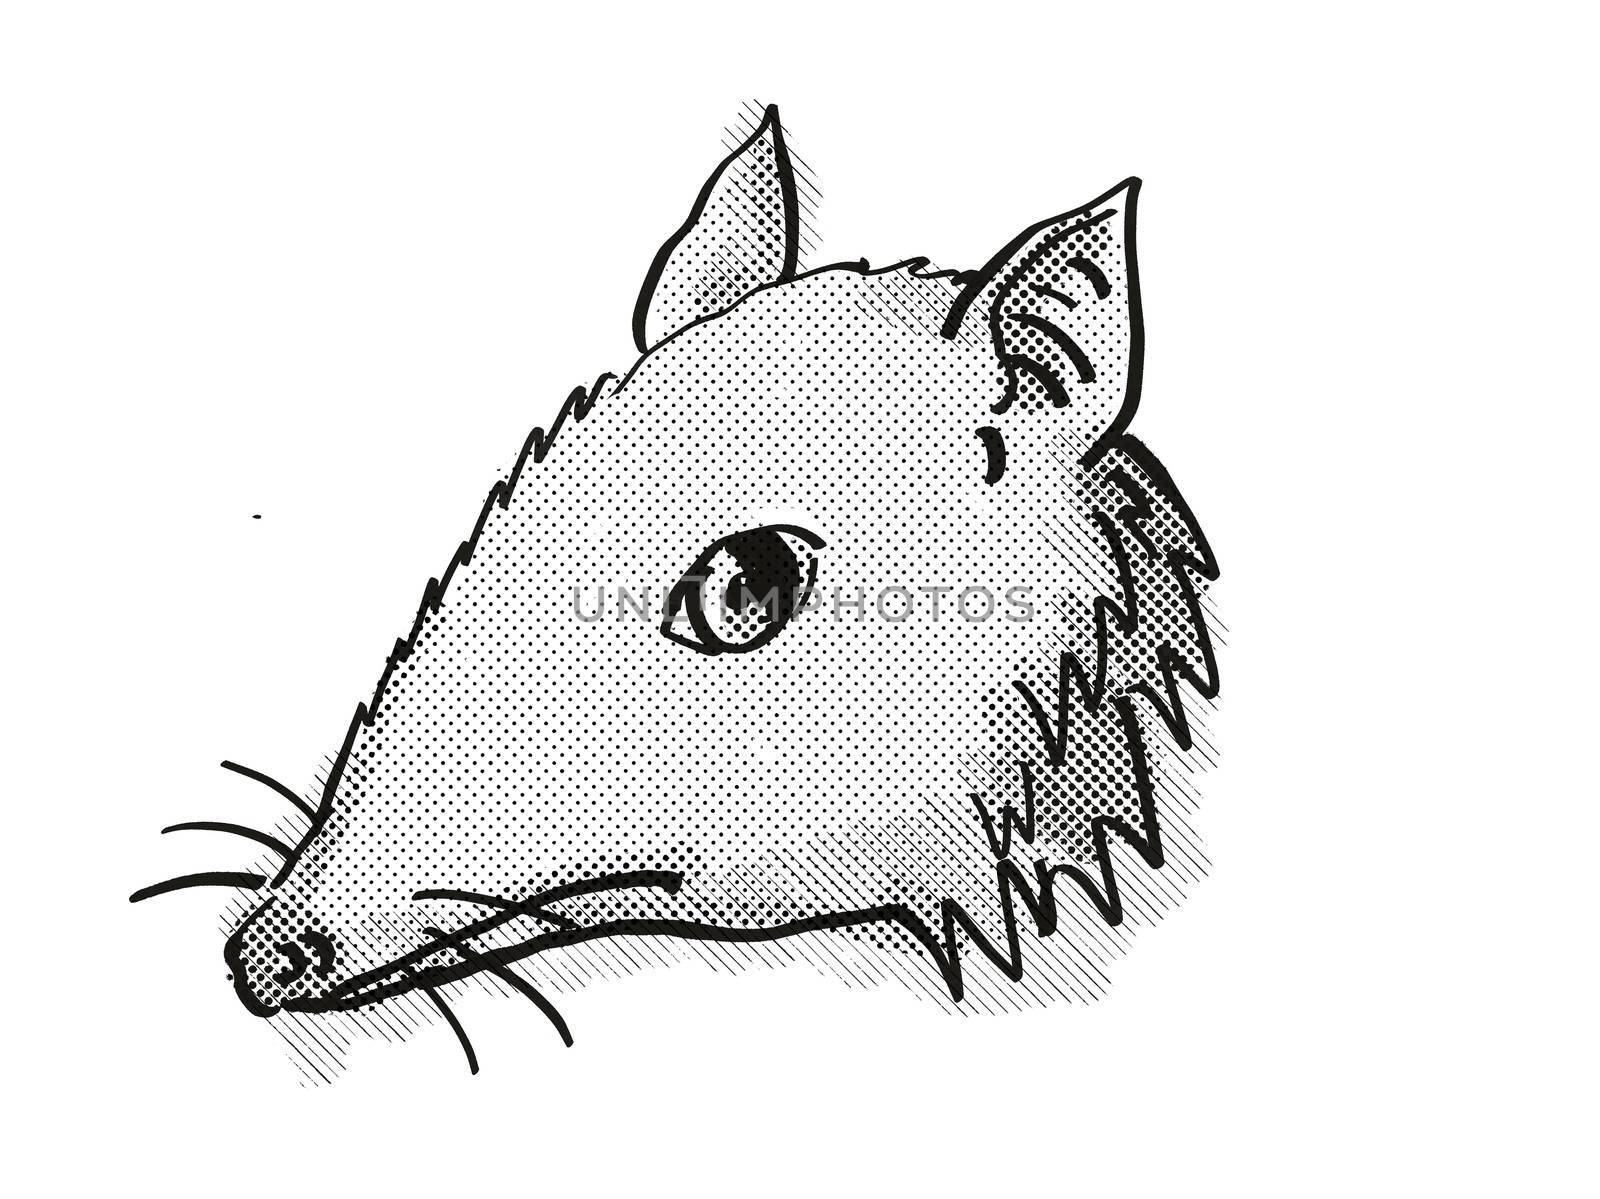 Retro cartoon style drawing of head of a Long-Nosed Bandicoot , an endangered wildlife species on isolated white background done in black and white.